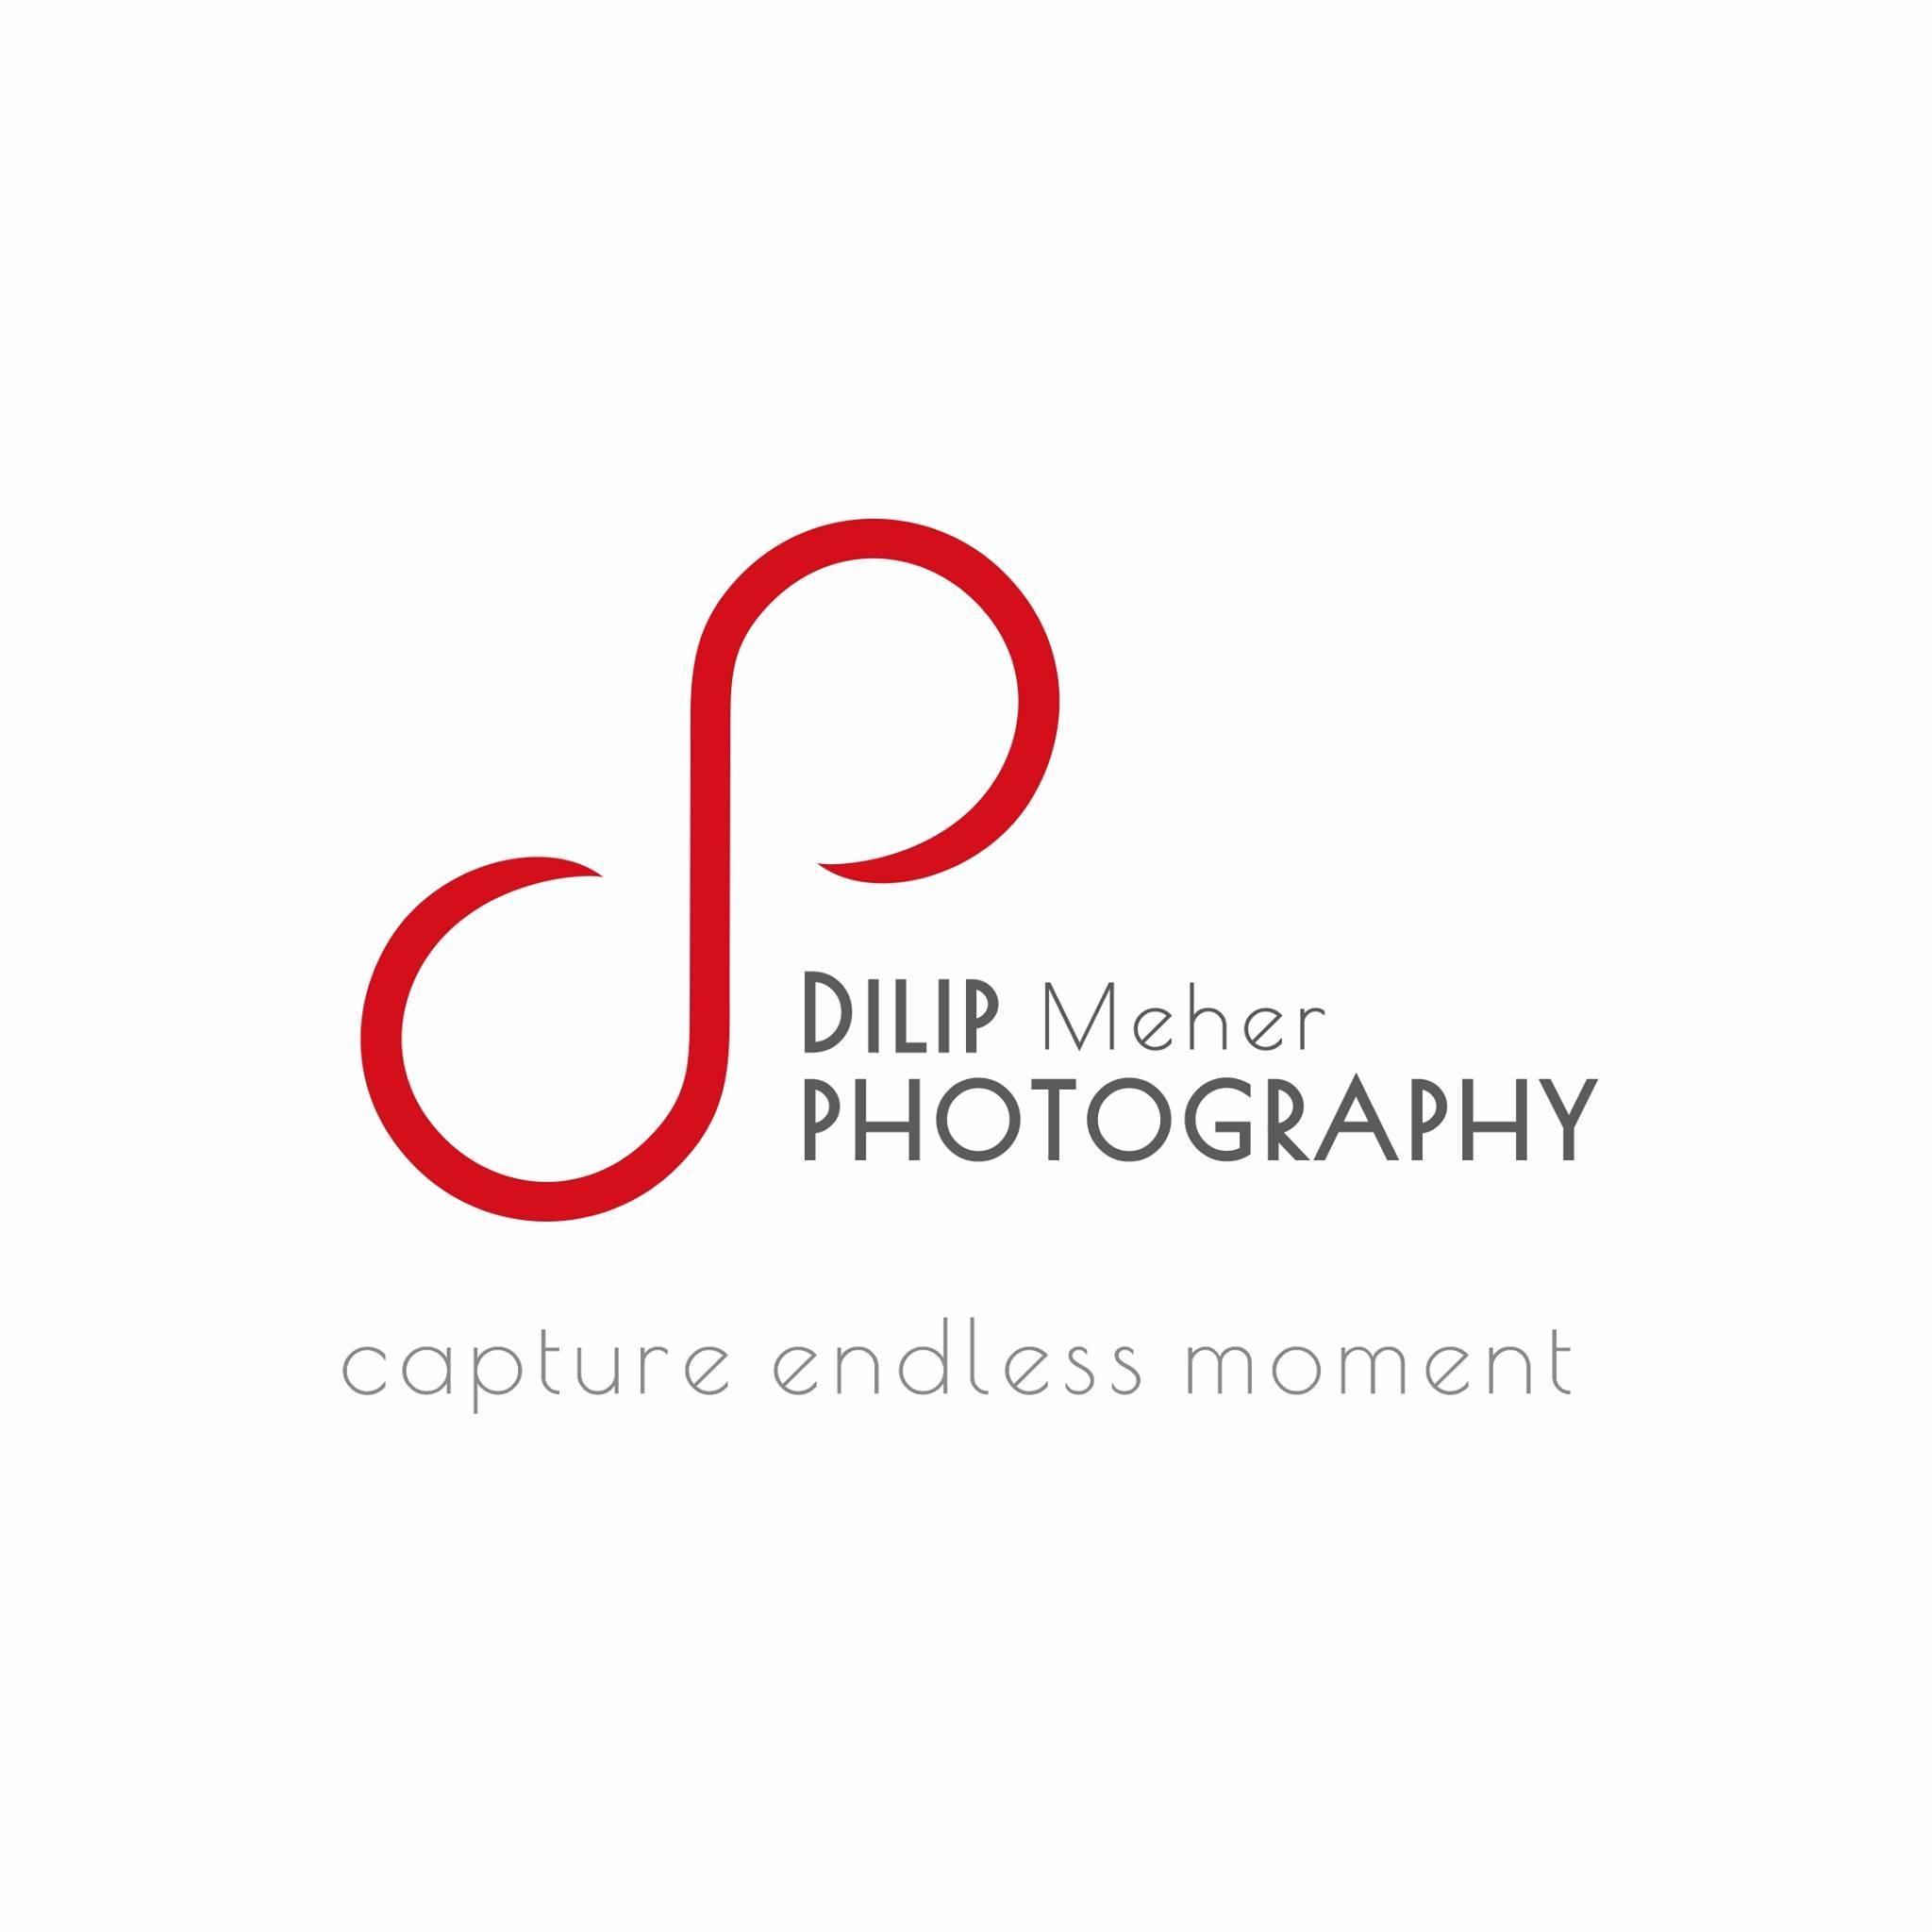 Dilip Meher Photography - Logo